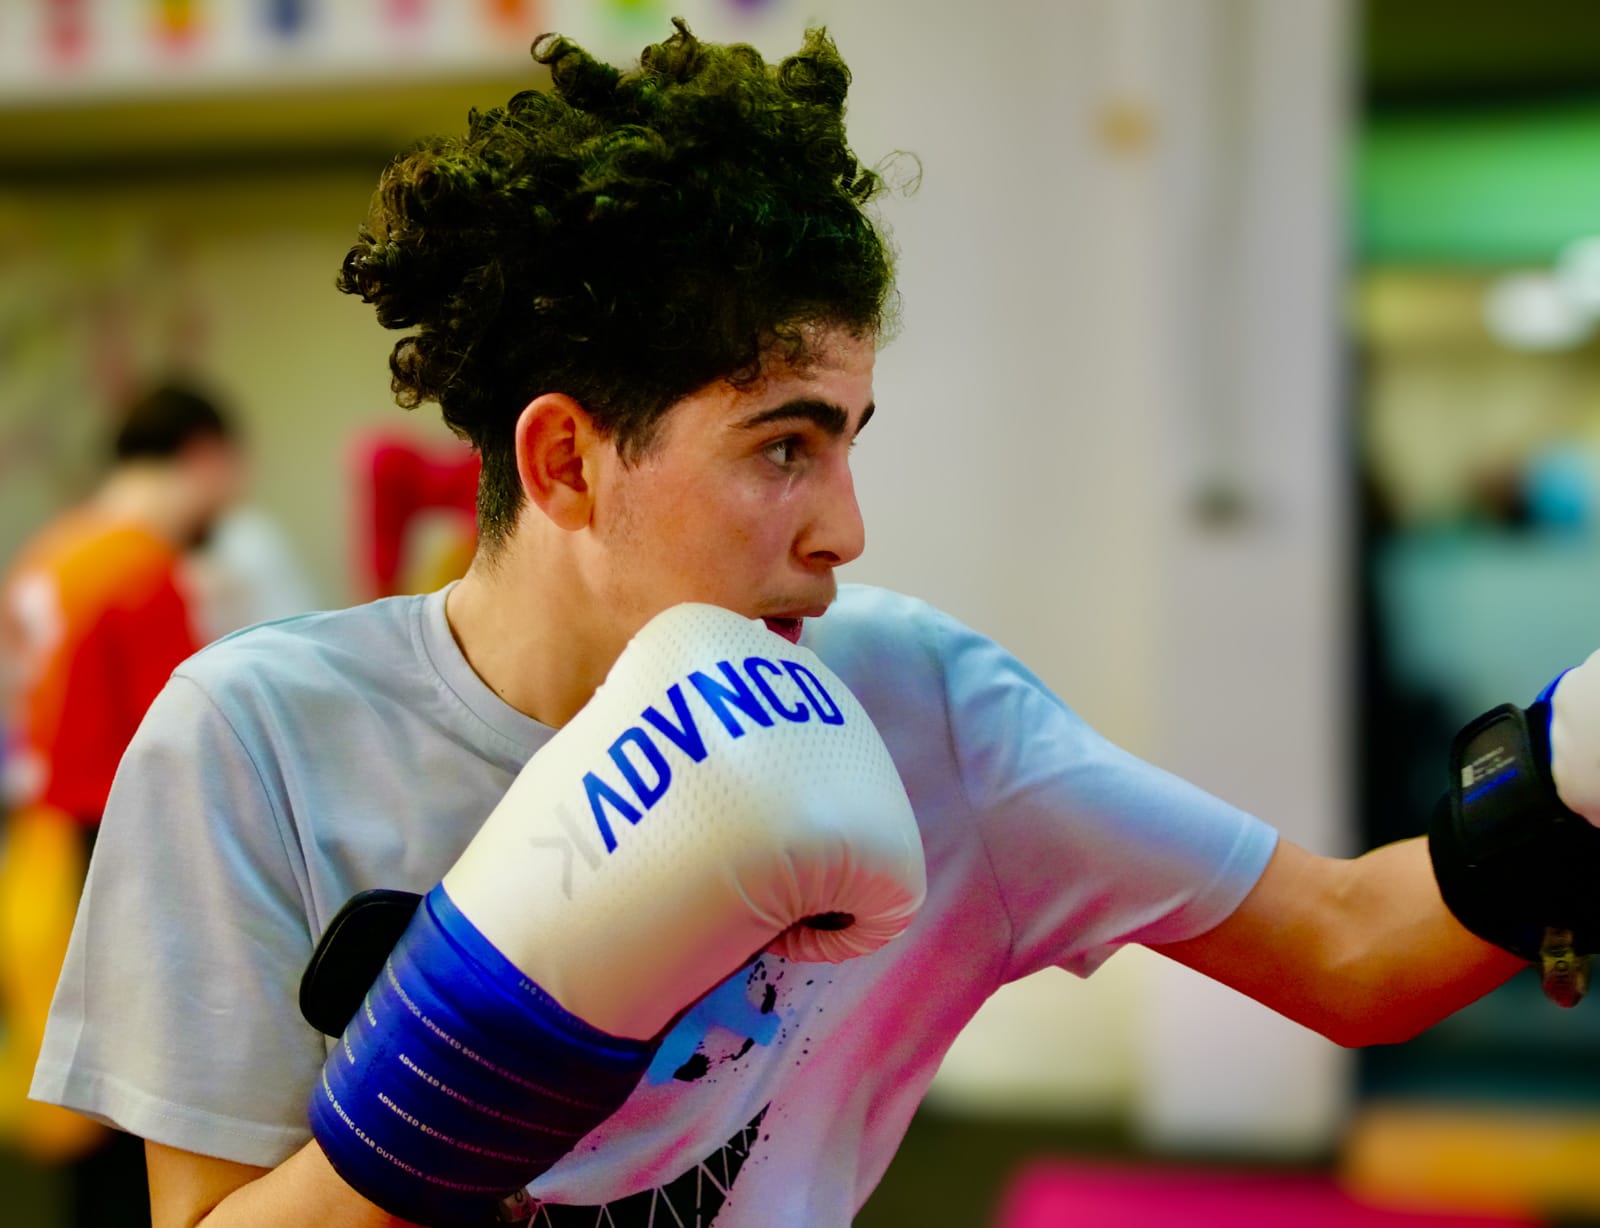 Boxer at N-Boxing Academy by Guney Cuceloglu for The New Yorker Life